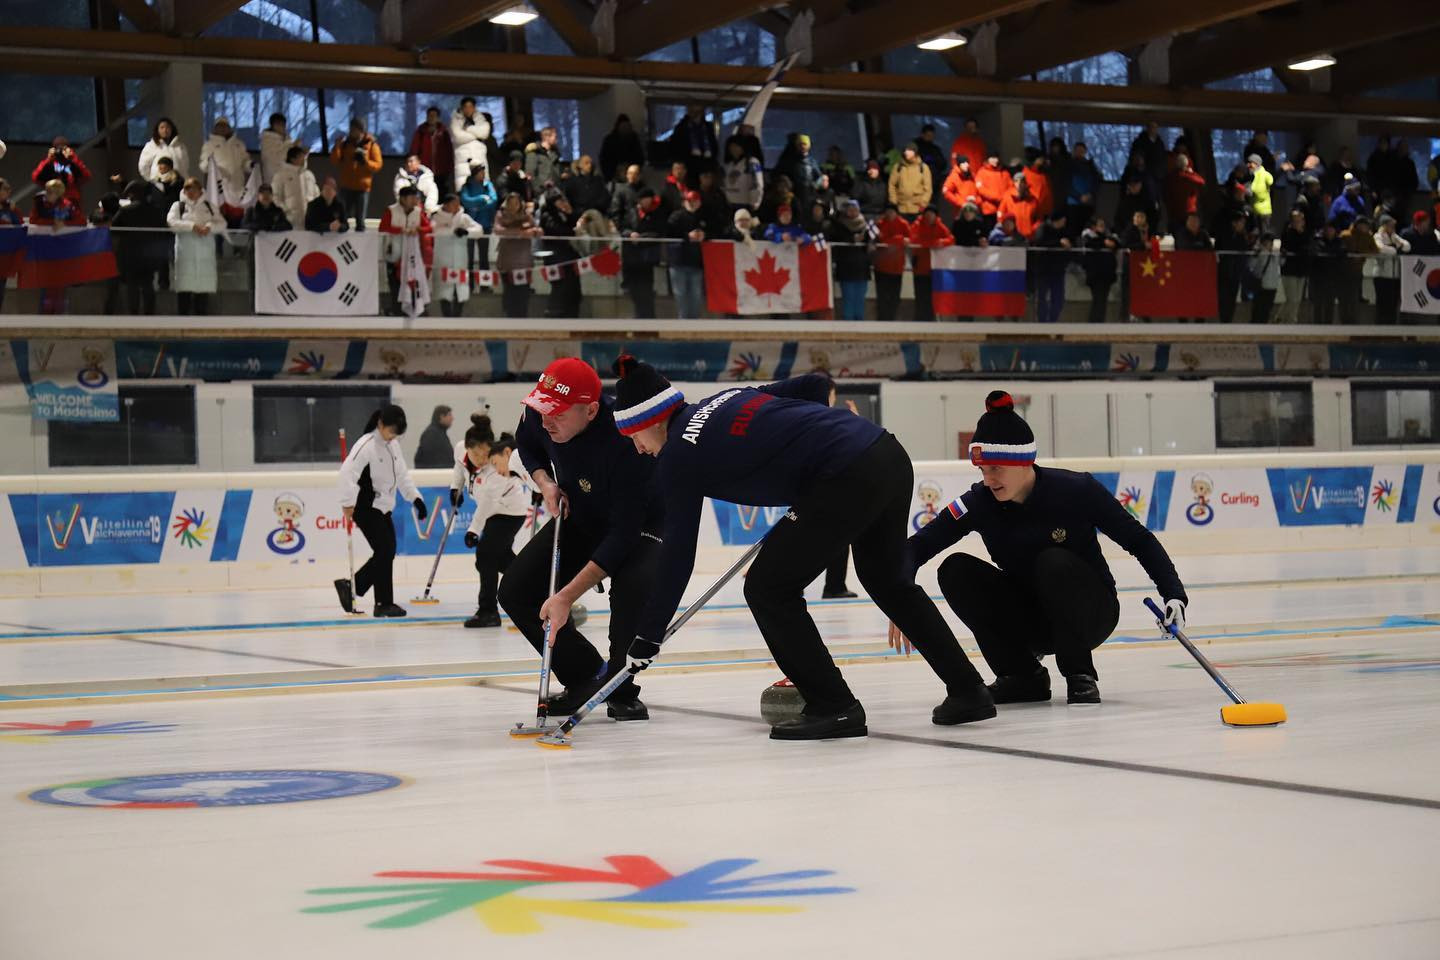 Russia are through to the men's and women's curling finals at the Winter Deaflympics in Sondrio ©Winter Deaflympics Valtellina-Valchiavenna 2019/Facebook